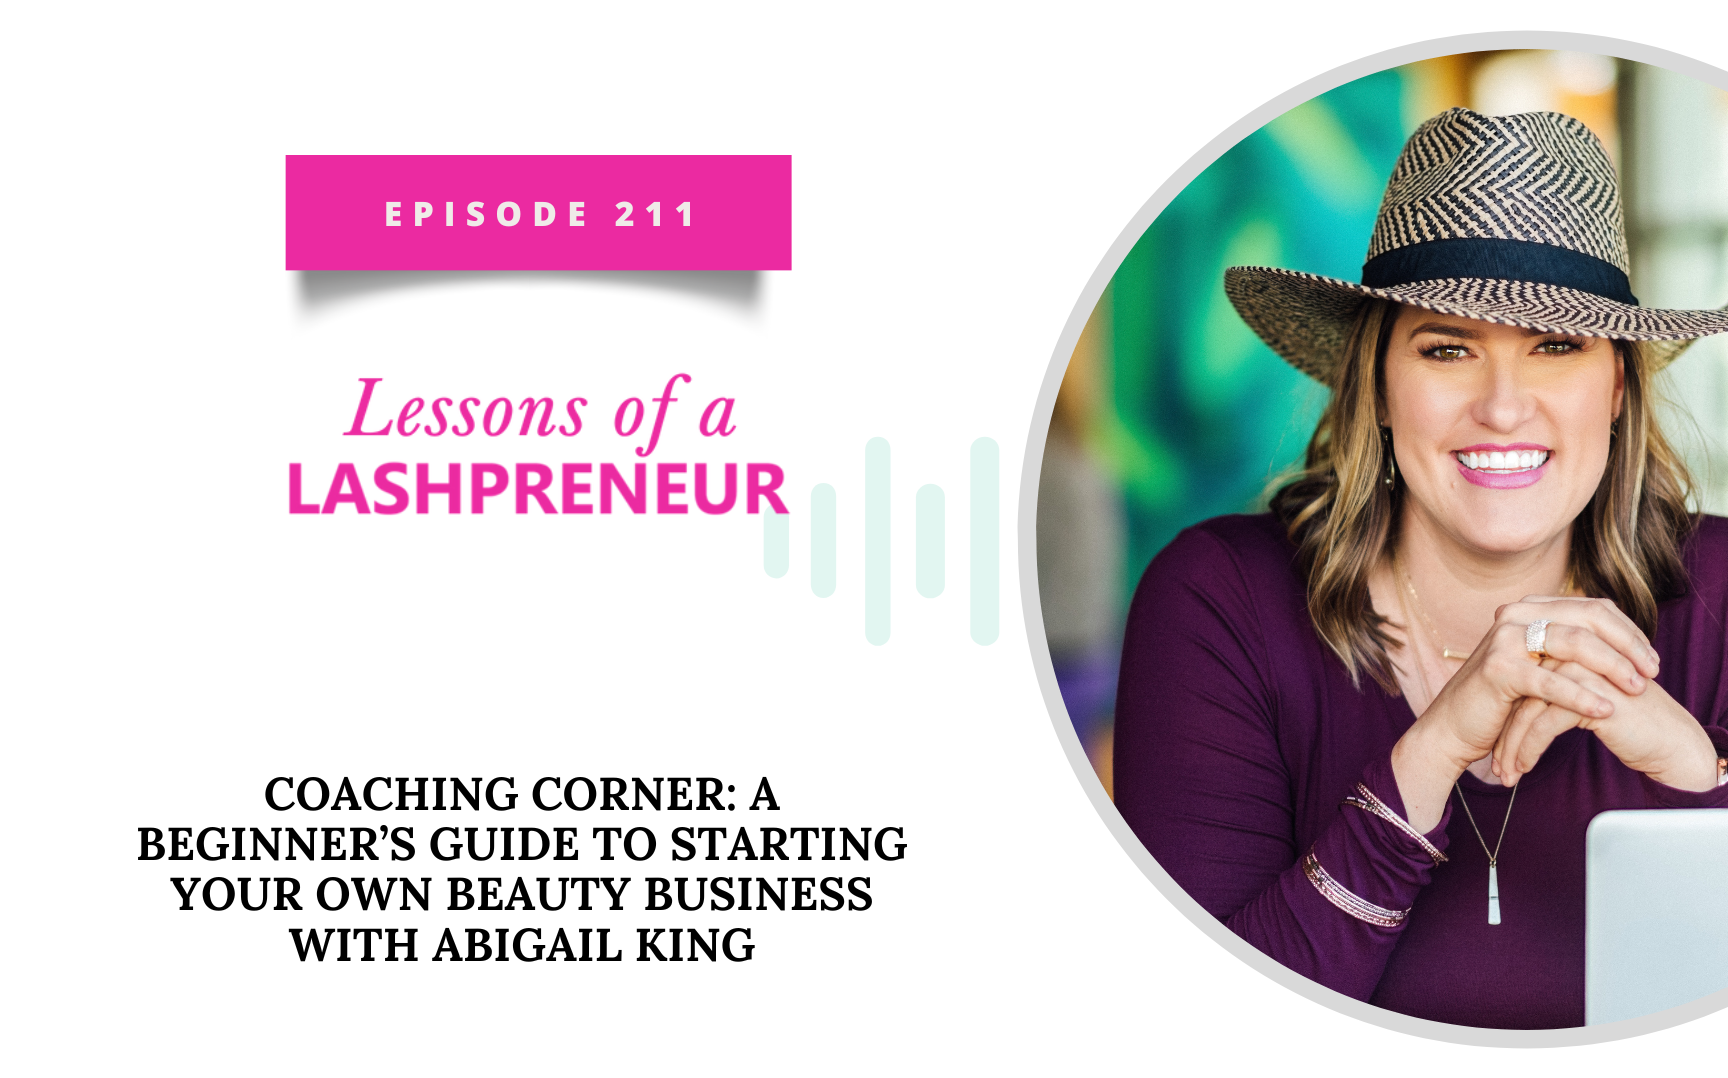 Coaching Corner: A Beginner’s Guide To Starting Your Own Beauty Business with Abigail King